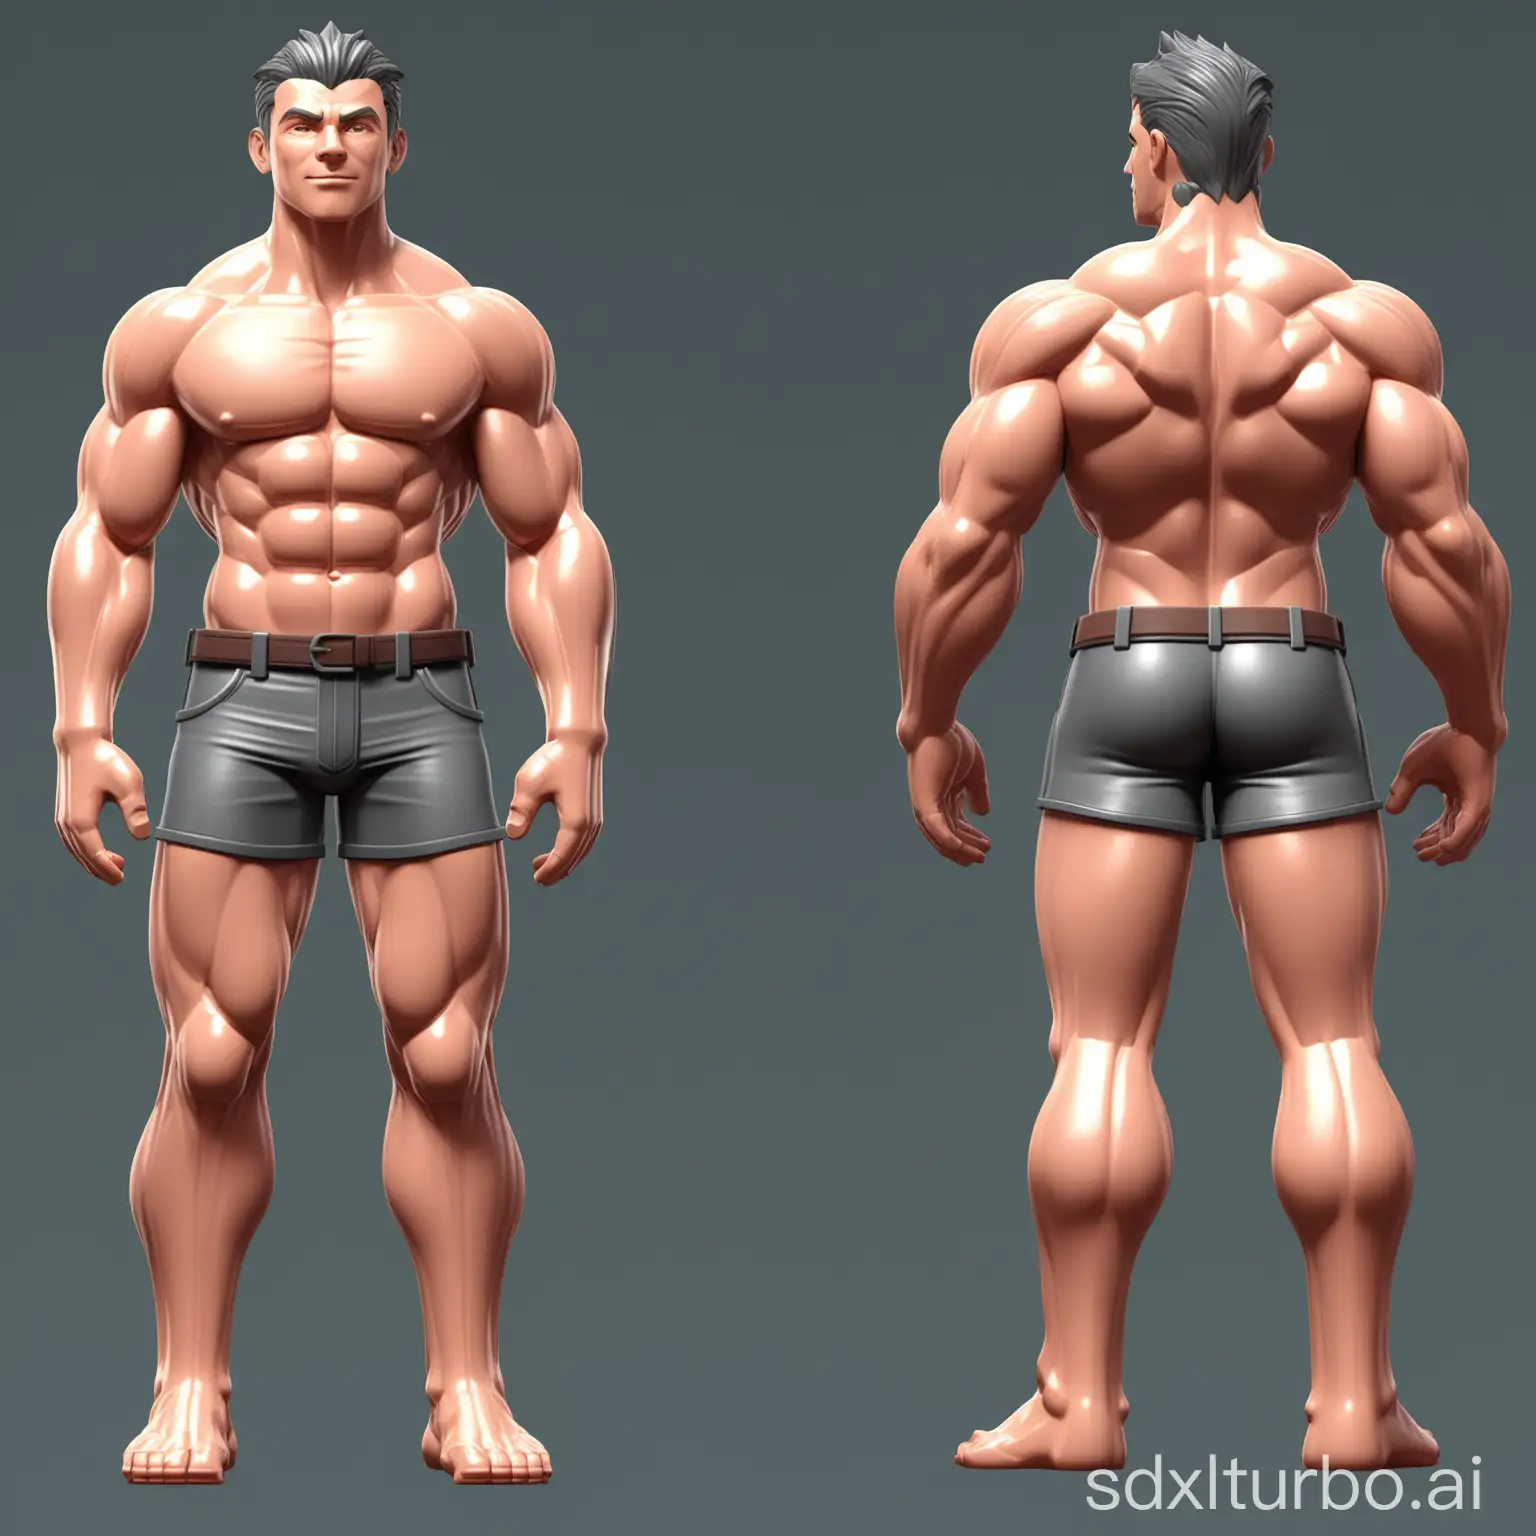 Stylized-Muscular-Male-Character-Sheet-Front-and-Side-View-in-APose-for-3D-Modeling